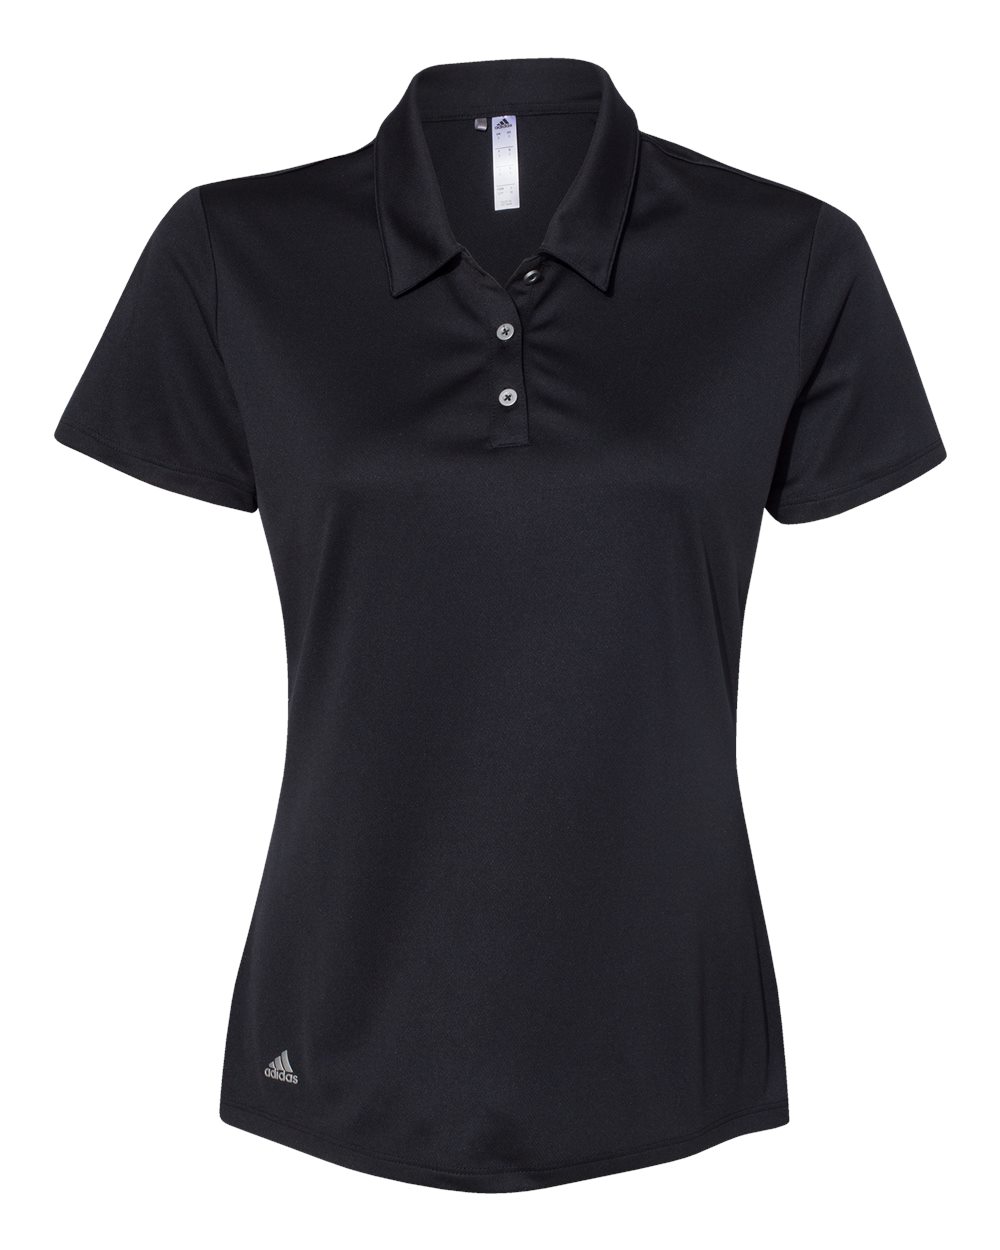 Picture of Adidas Women's Performance Polo 